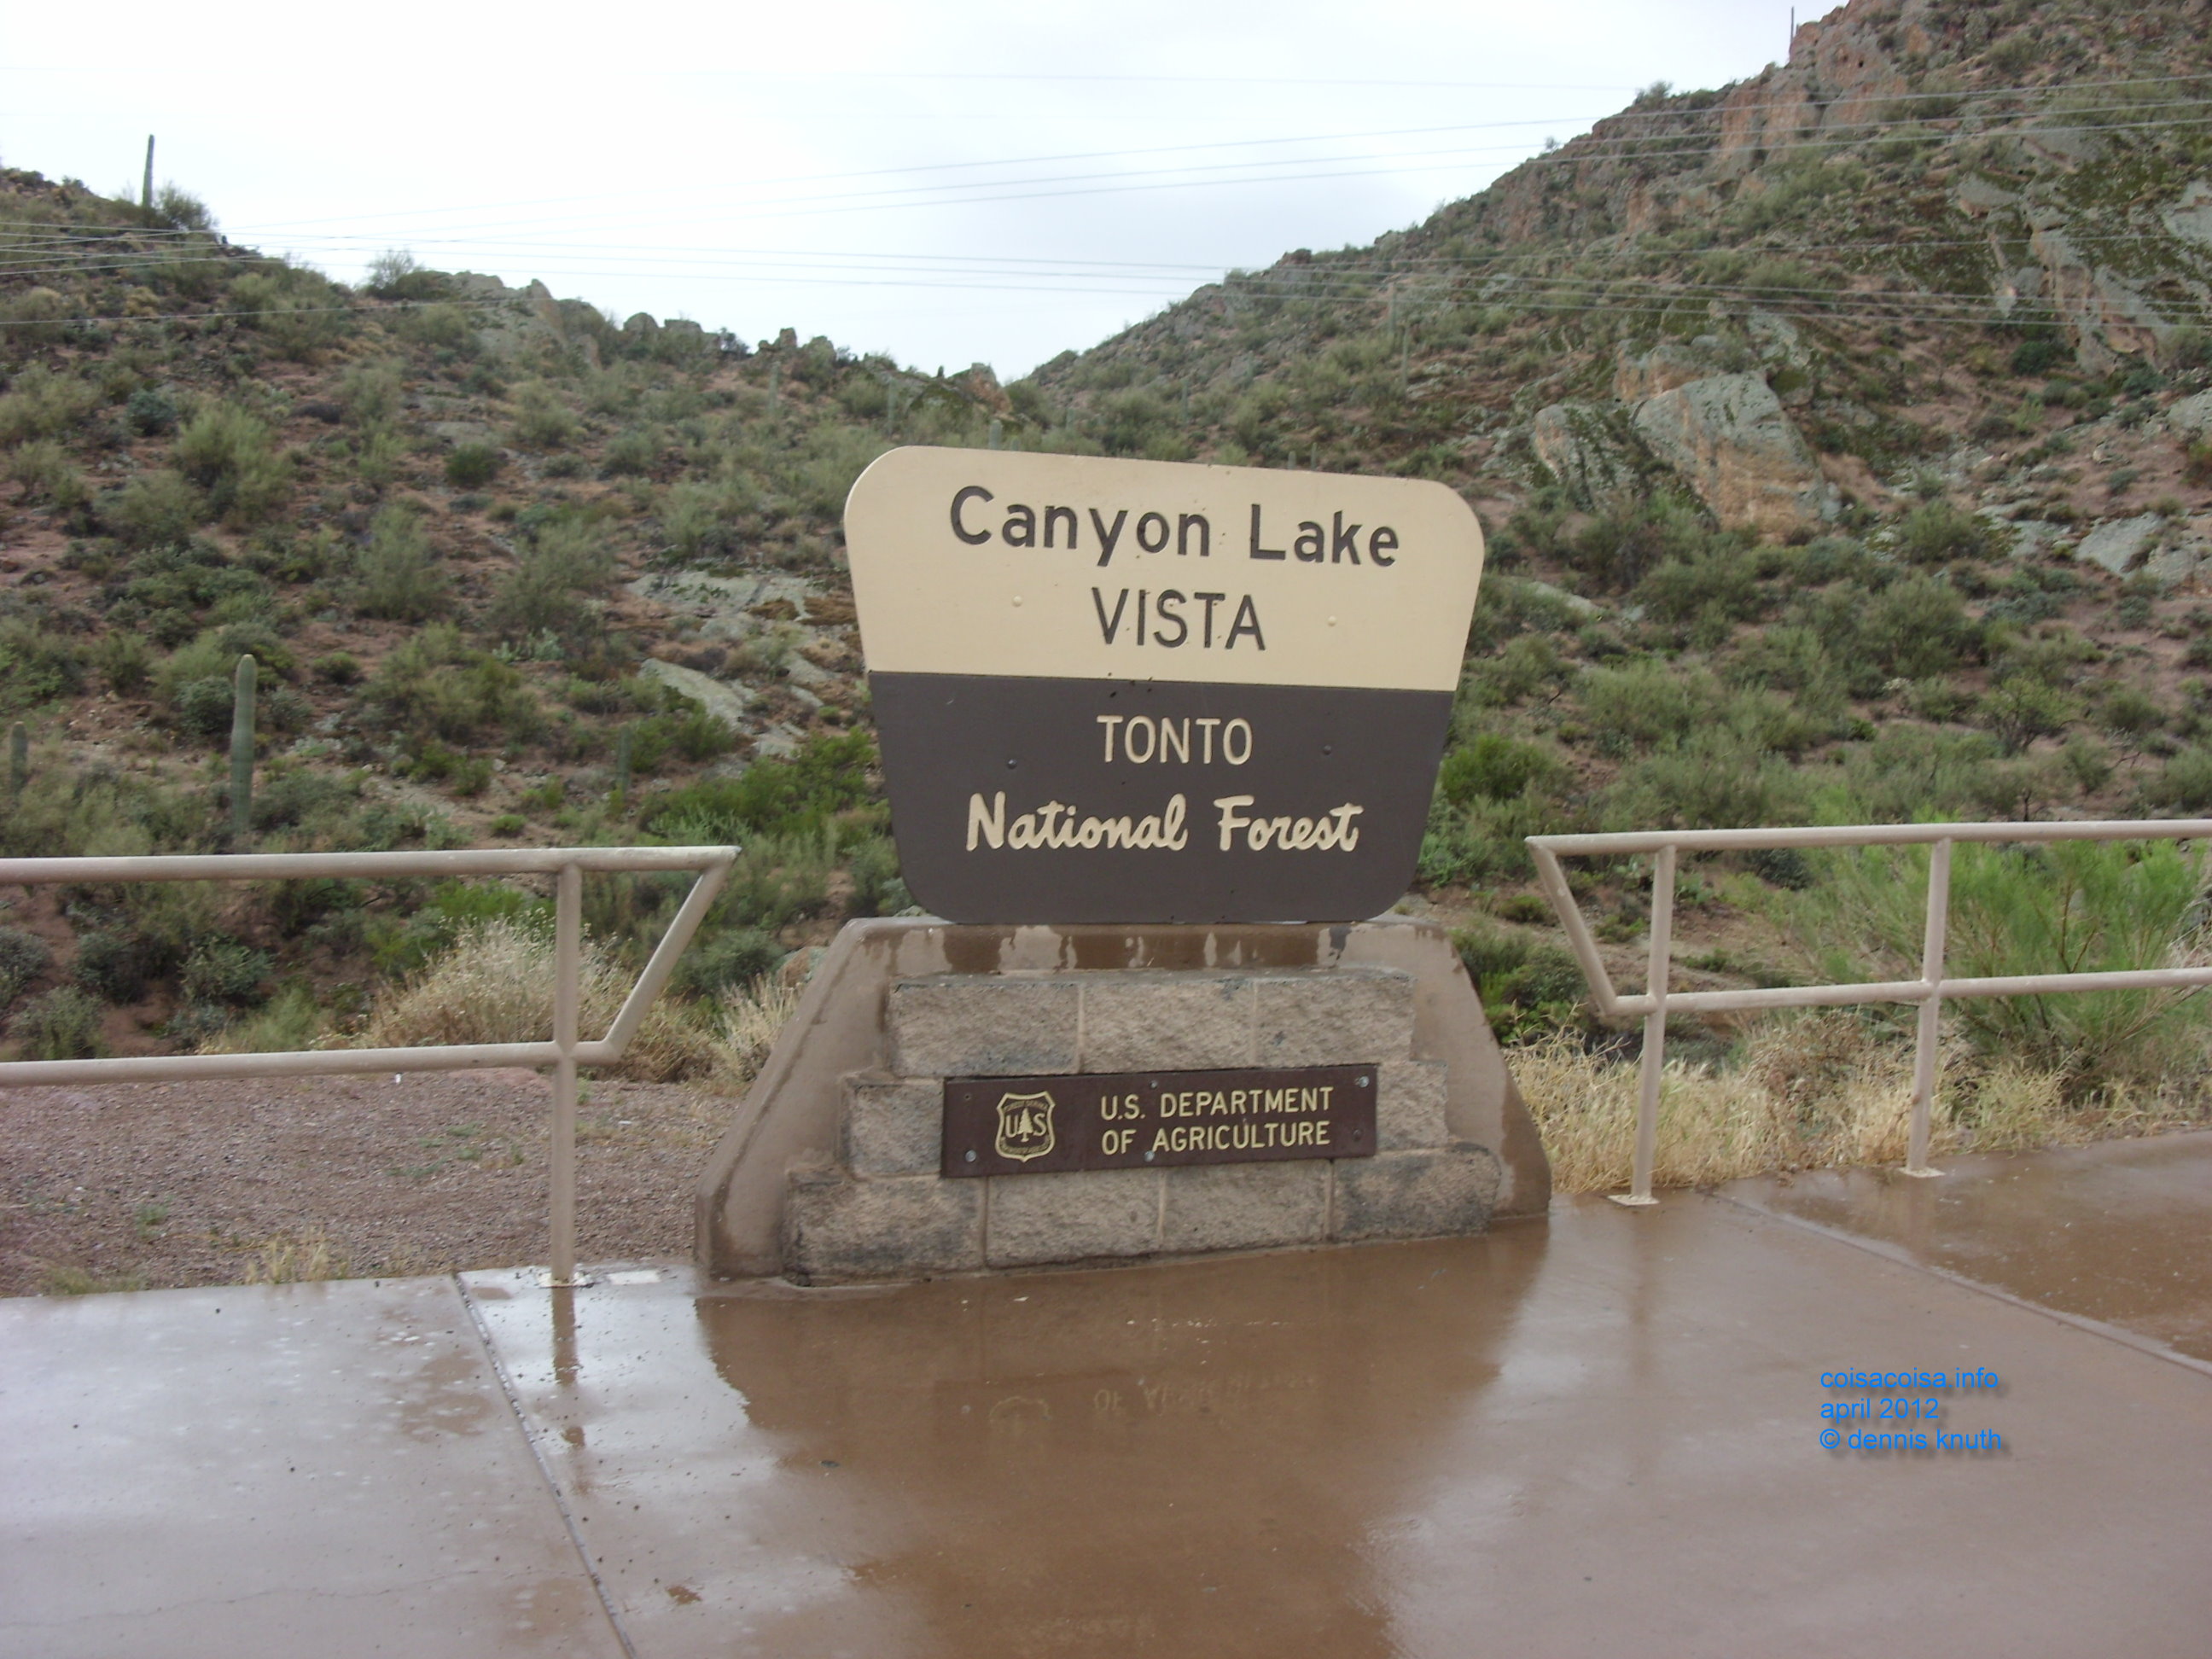 Vista marker for Canyon Lake and Tonto National Forest